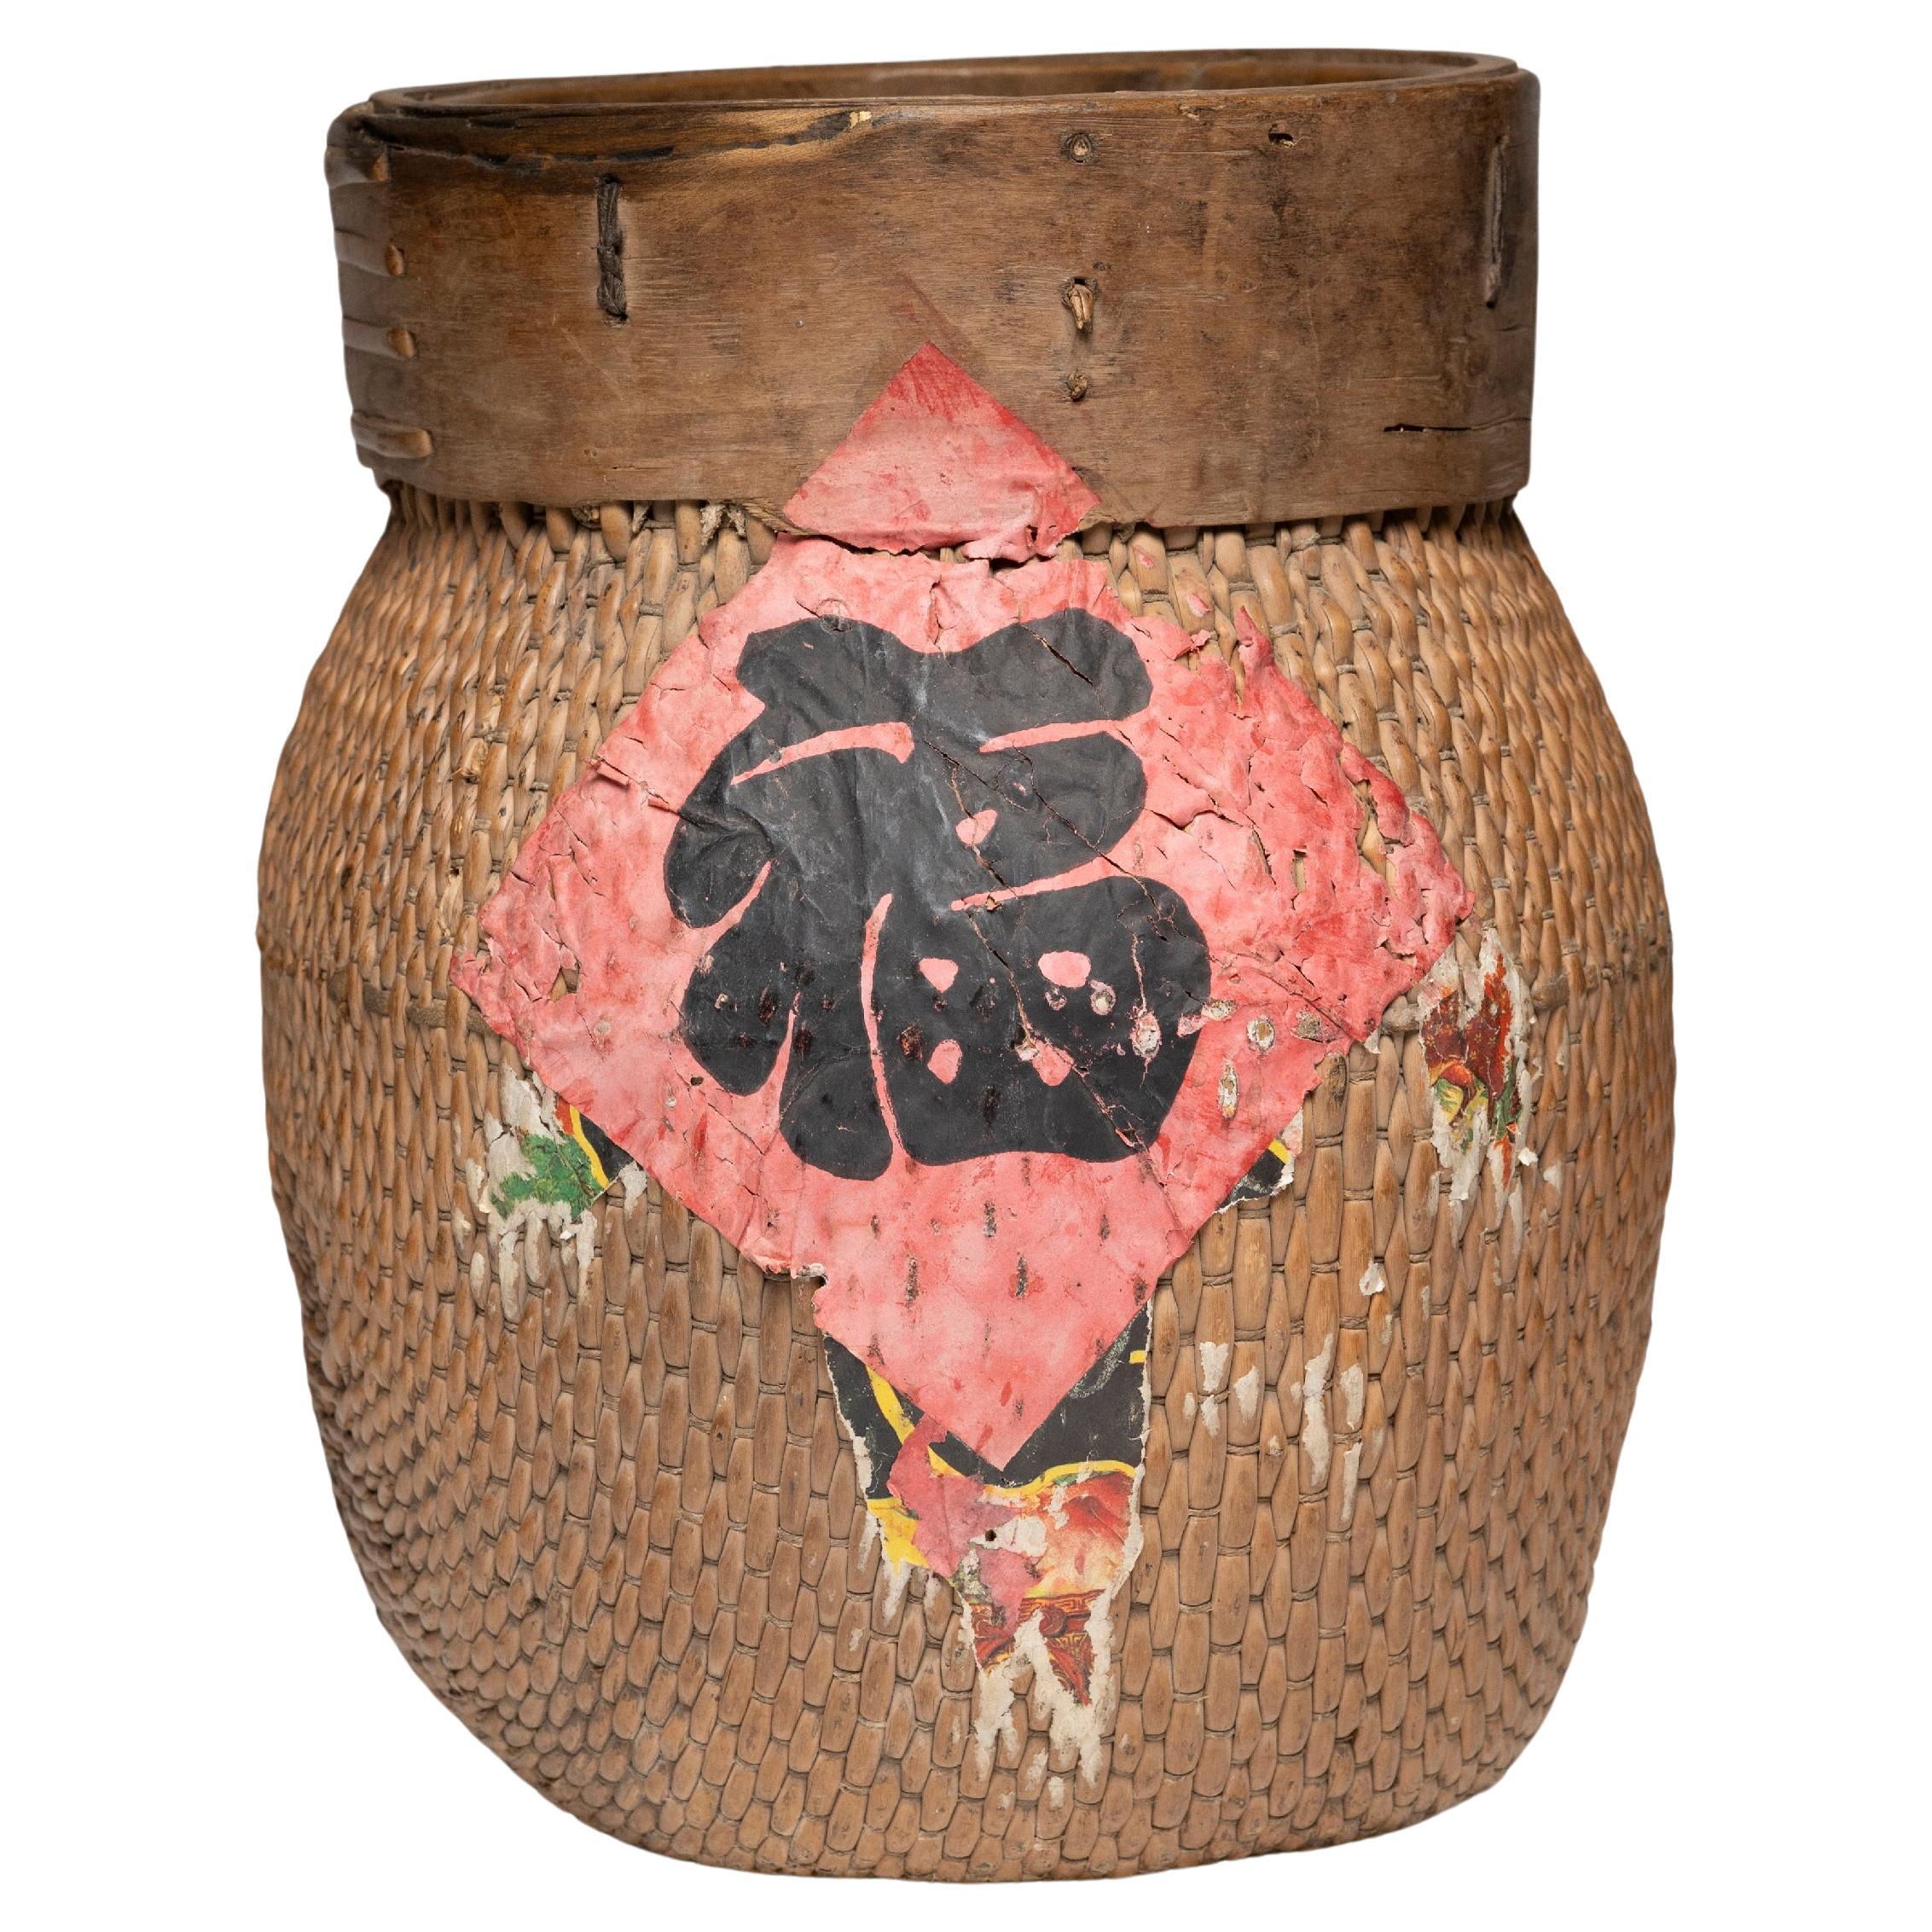 Chinese Good Fortune River Basket, circa 1900